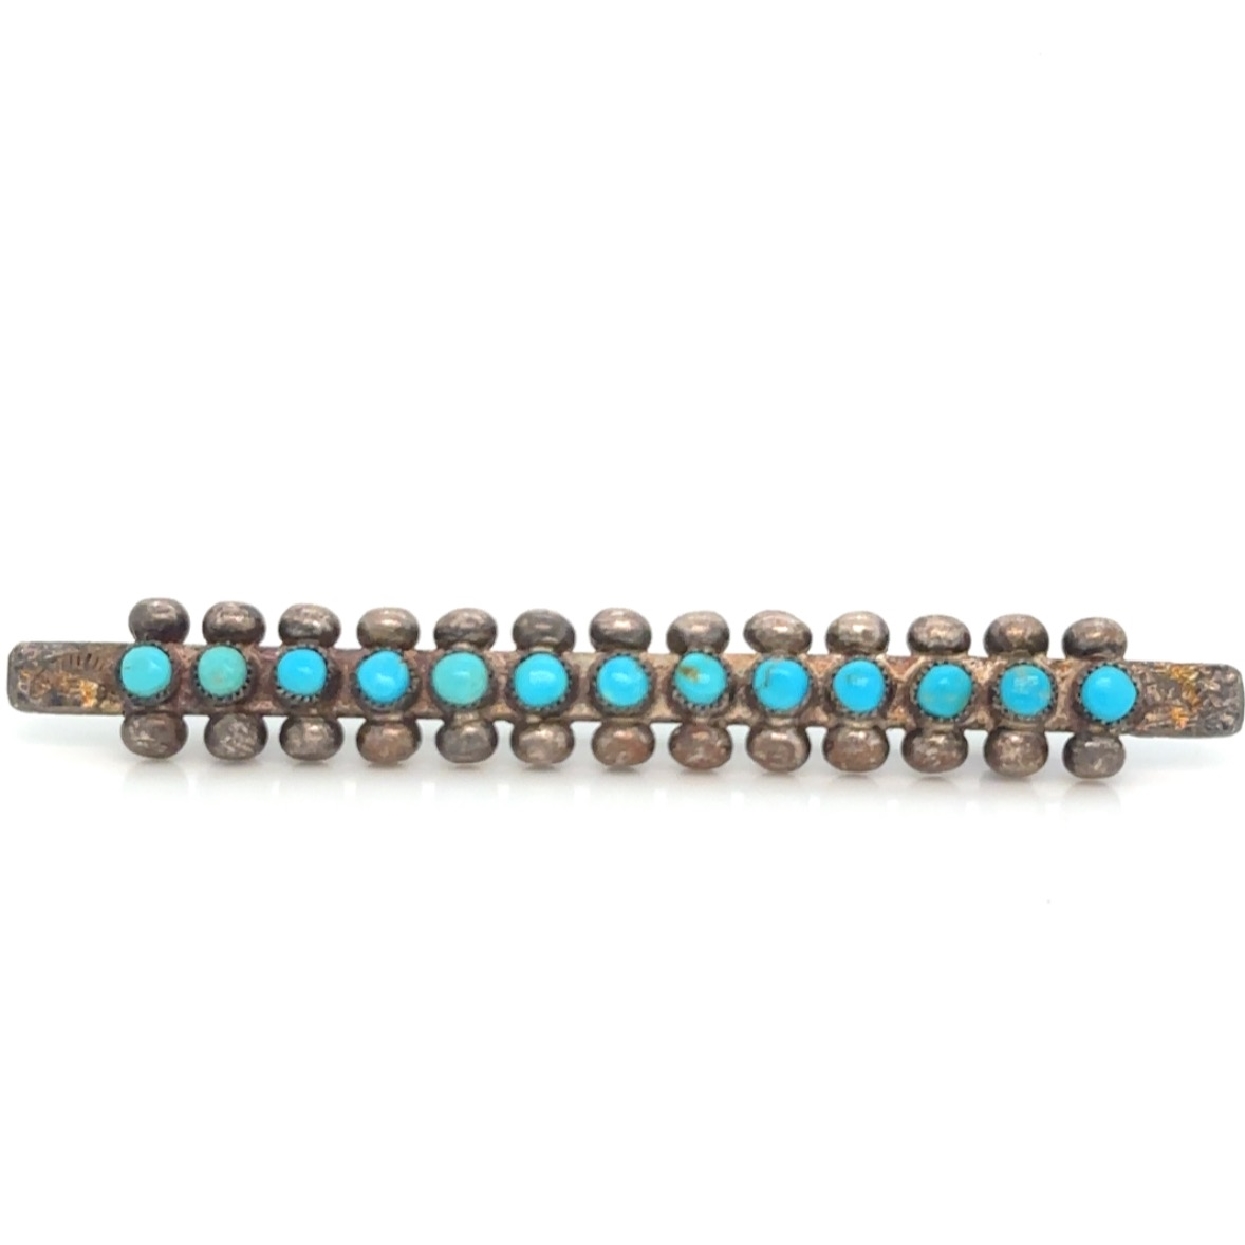 Vintage Sterling Silver Turquoise Bar Pin with Bead Detailing 